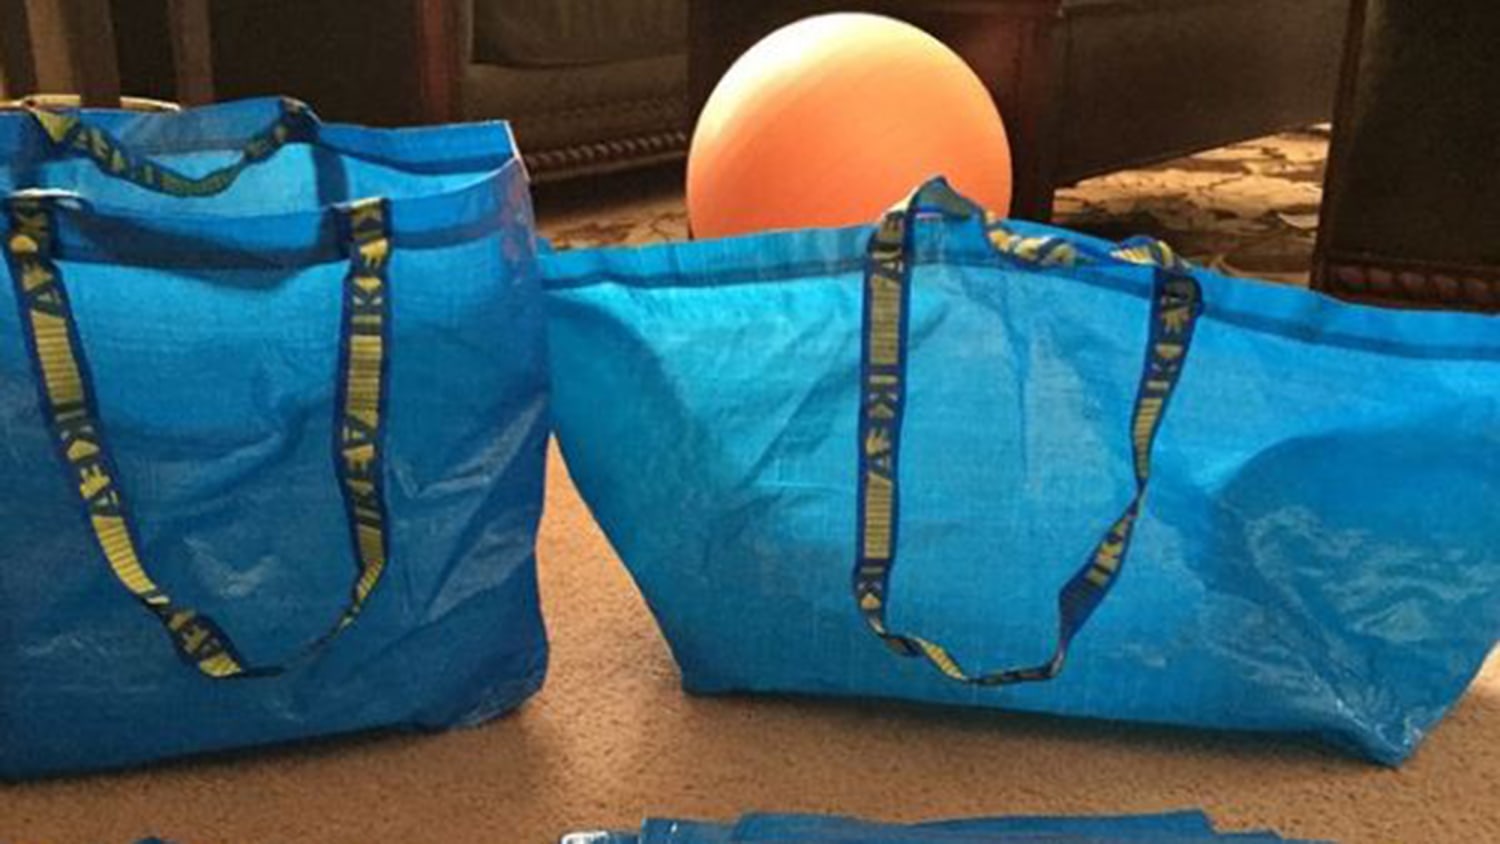 IKEA's Iconic Frakta Bag Is Getting An Eco-Friendly Makeover